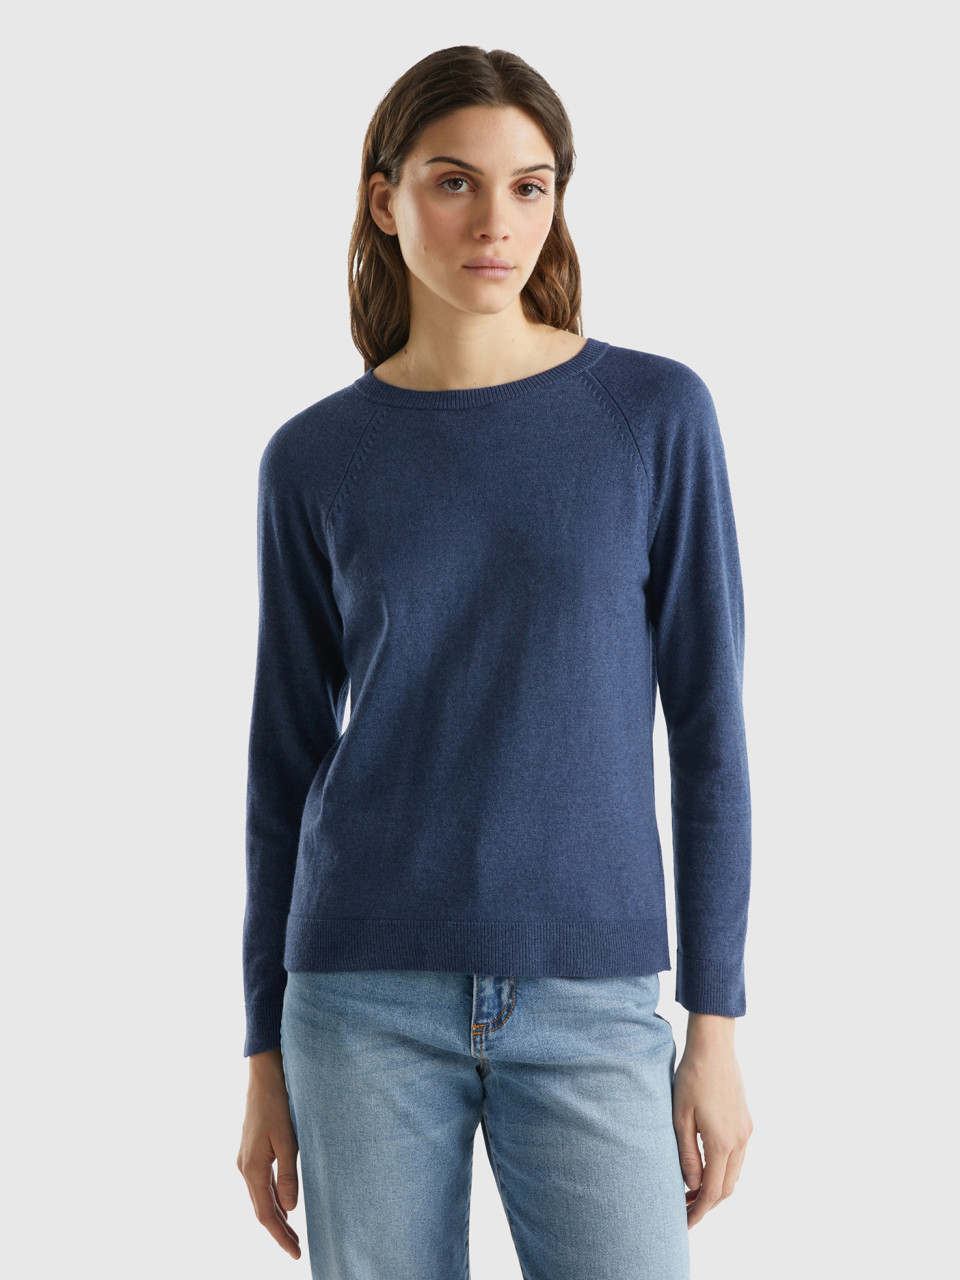 Benetton, Air Force Blue Crew Neck Sweater In Cashmere And Wool Blend, Air Force Blue, Women